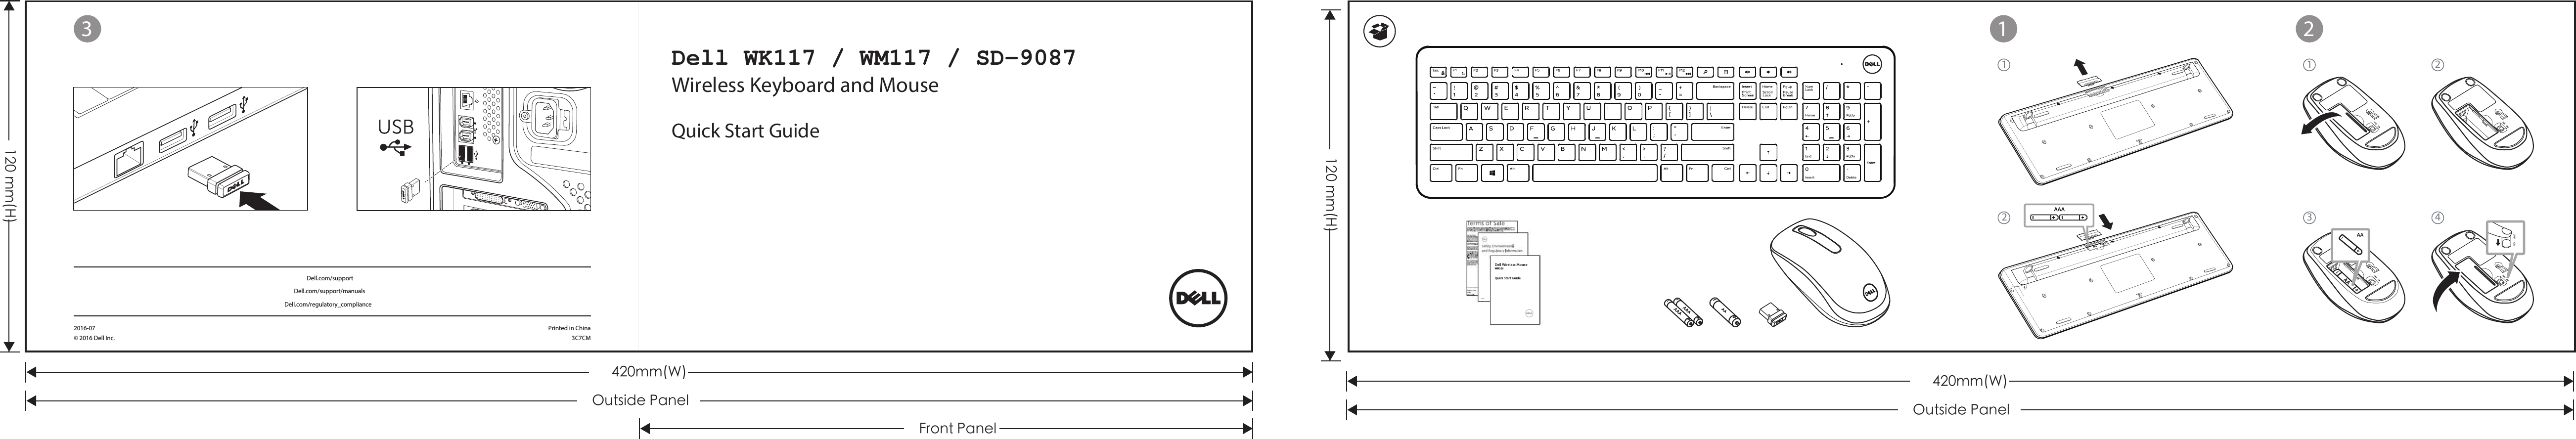 1 2121 23 4OFF     ONQuick Start GuideWM326Dell Wireless MouseDell WK117 / WM117 / SD-9087Wireless Keyboard and Mouse Quick Start Guide2016-07© 2016 Dell Inc.Printed in China3C7CMDell.com/supportDell.com/support/manualsDell.com/regulatory_compliance3120 mm(H)420mm(W)Outside PanelFront Panel120 mm(H)420mm(W)Outside Panel